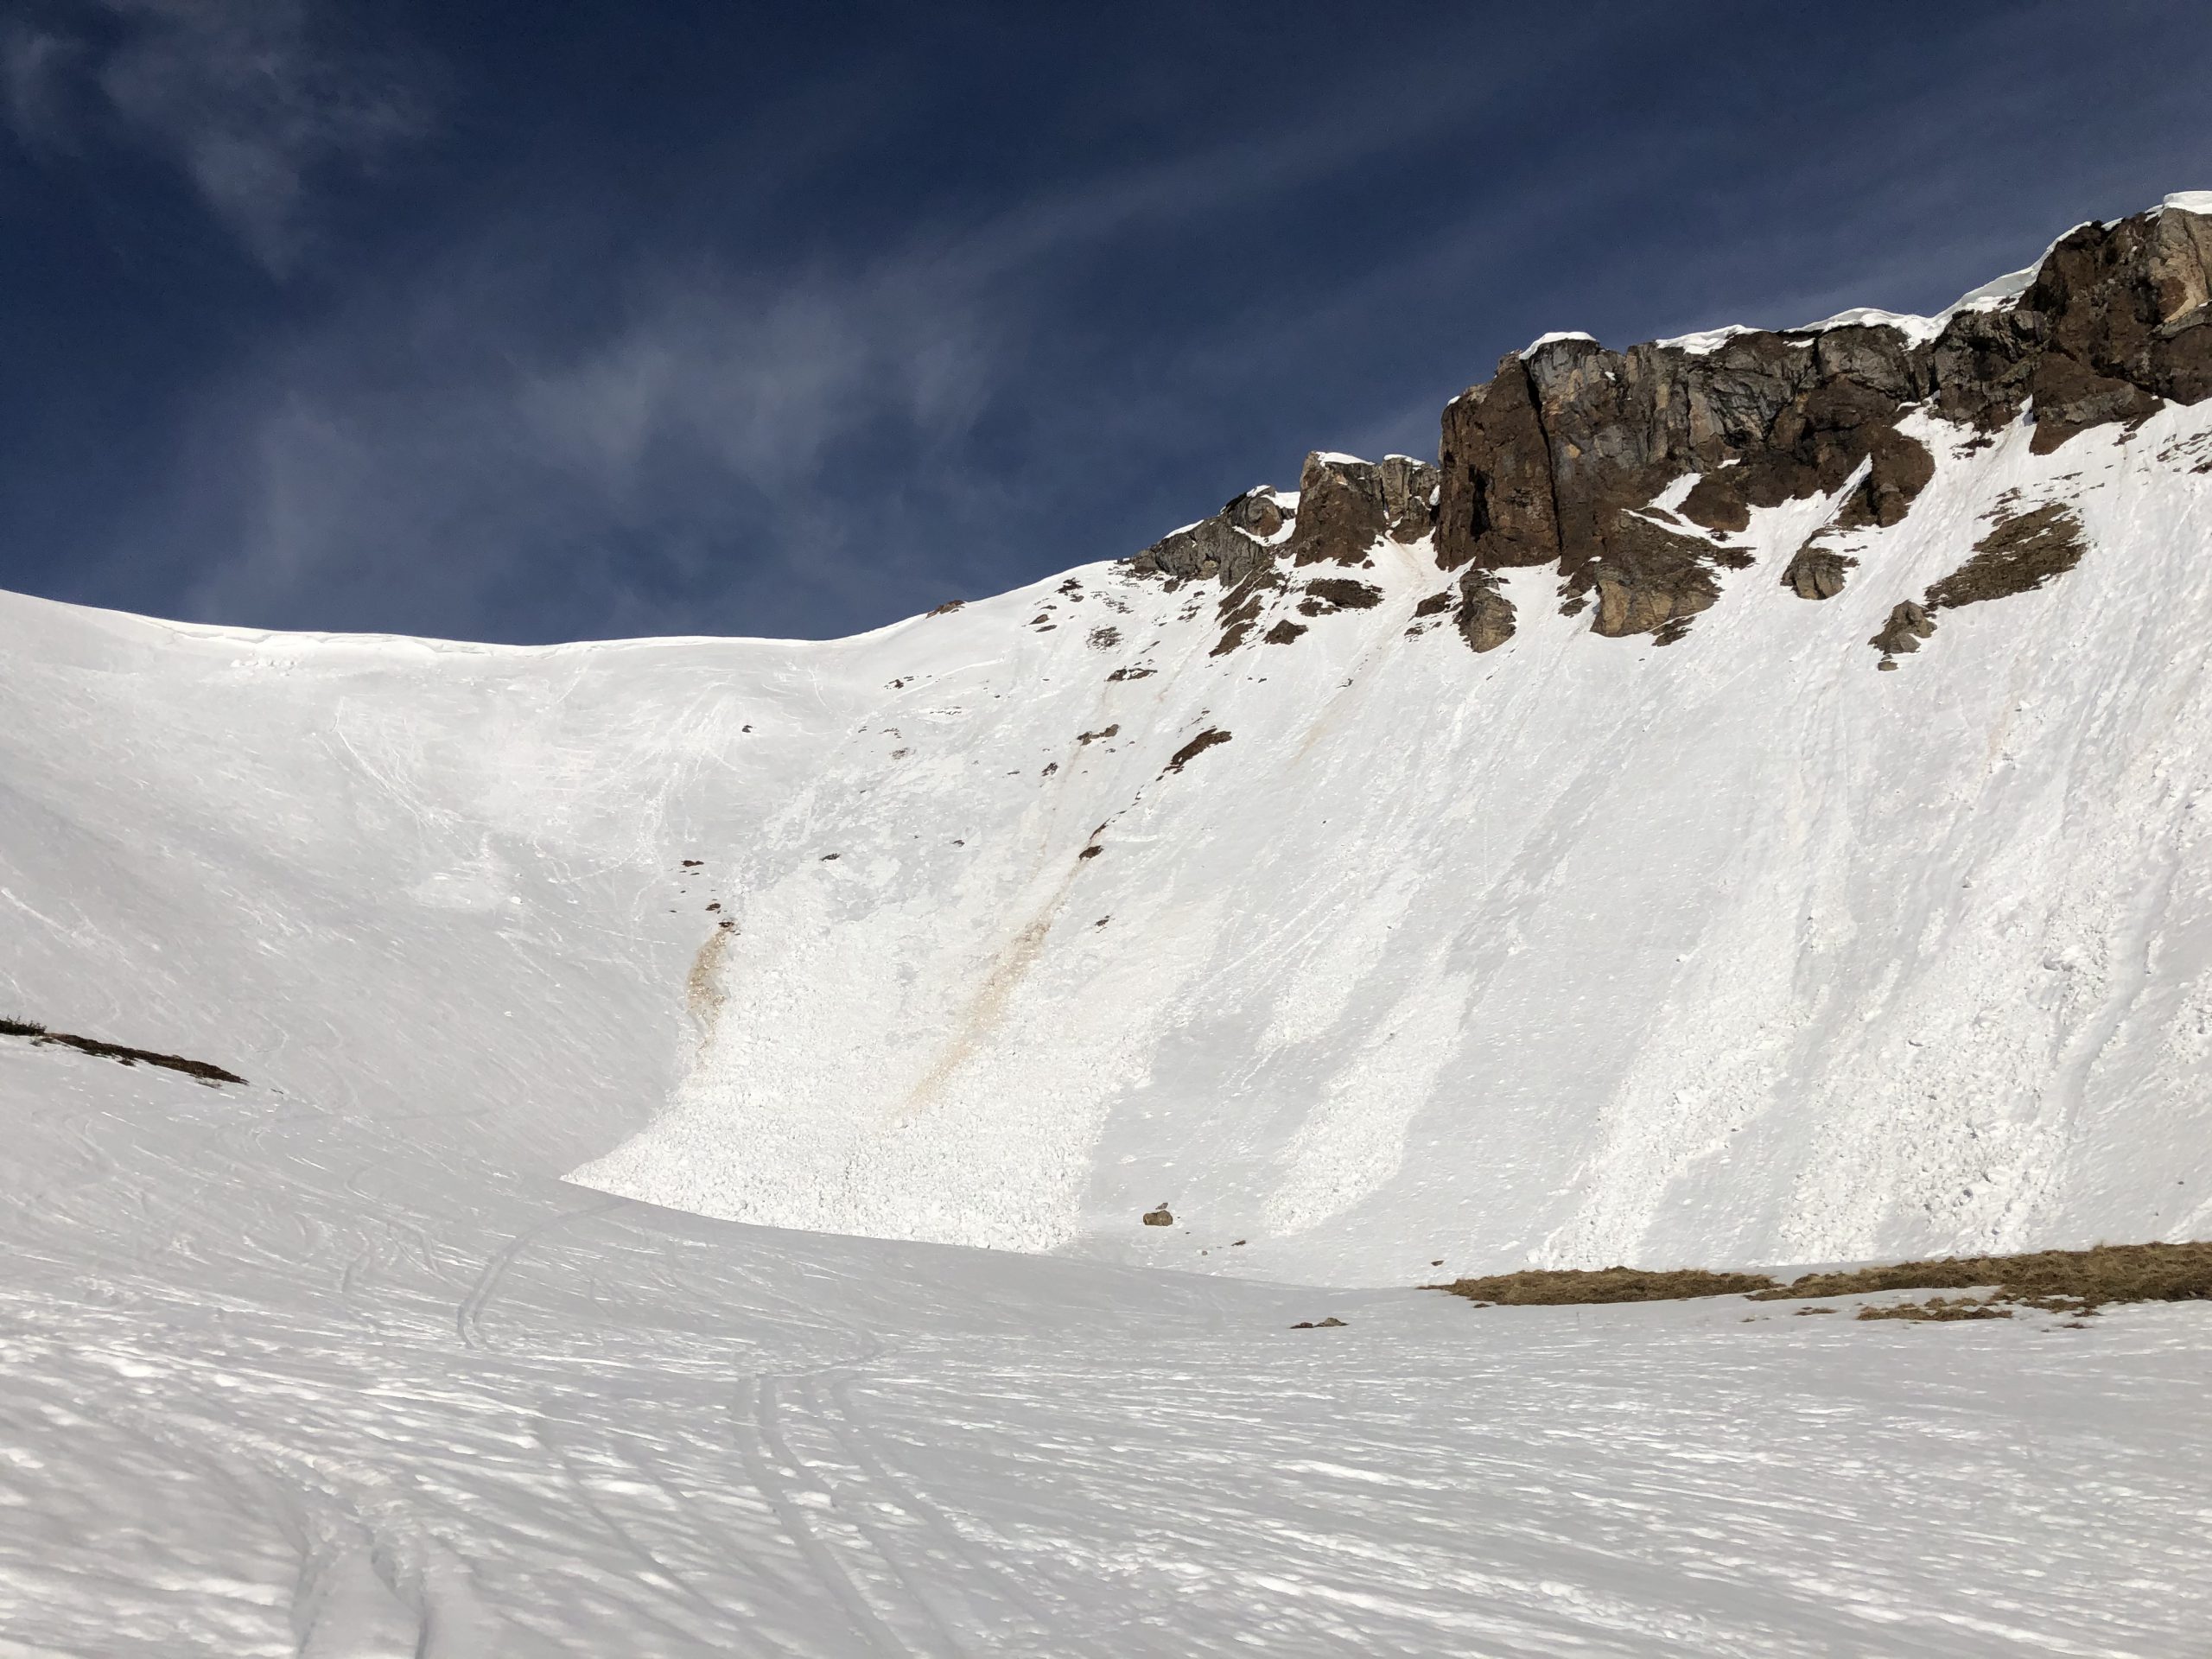 UPDATE: CADS – Camera-based Avalanche Detection System